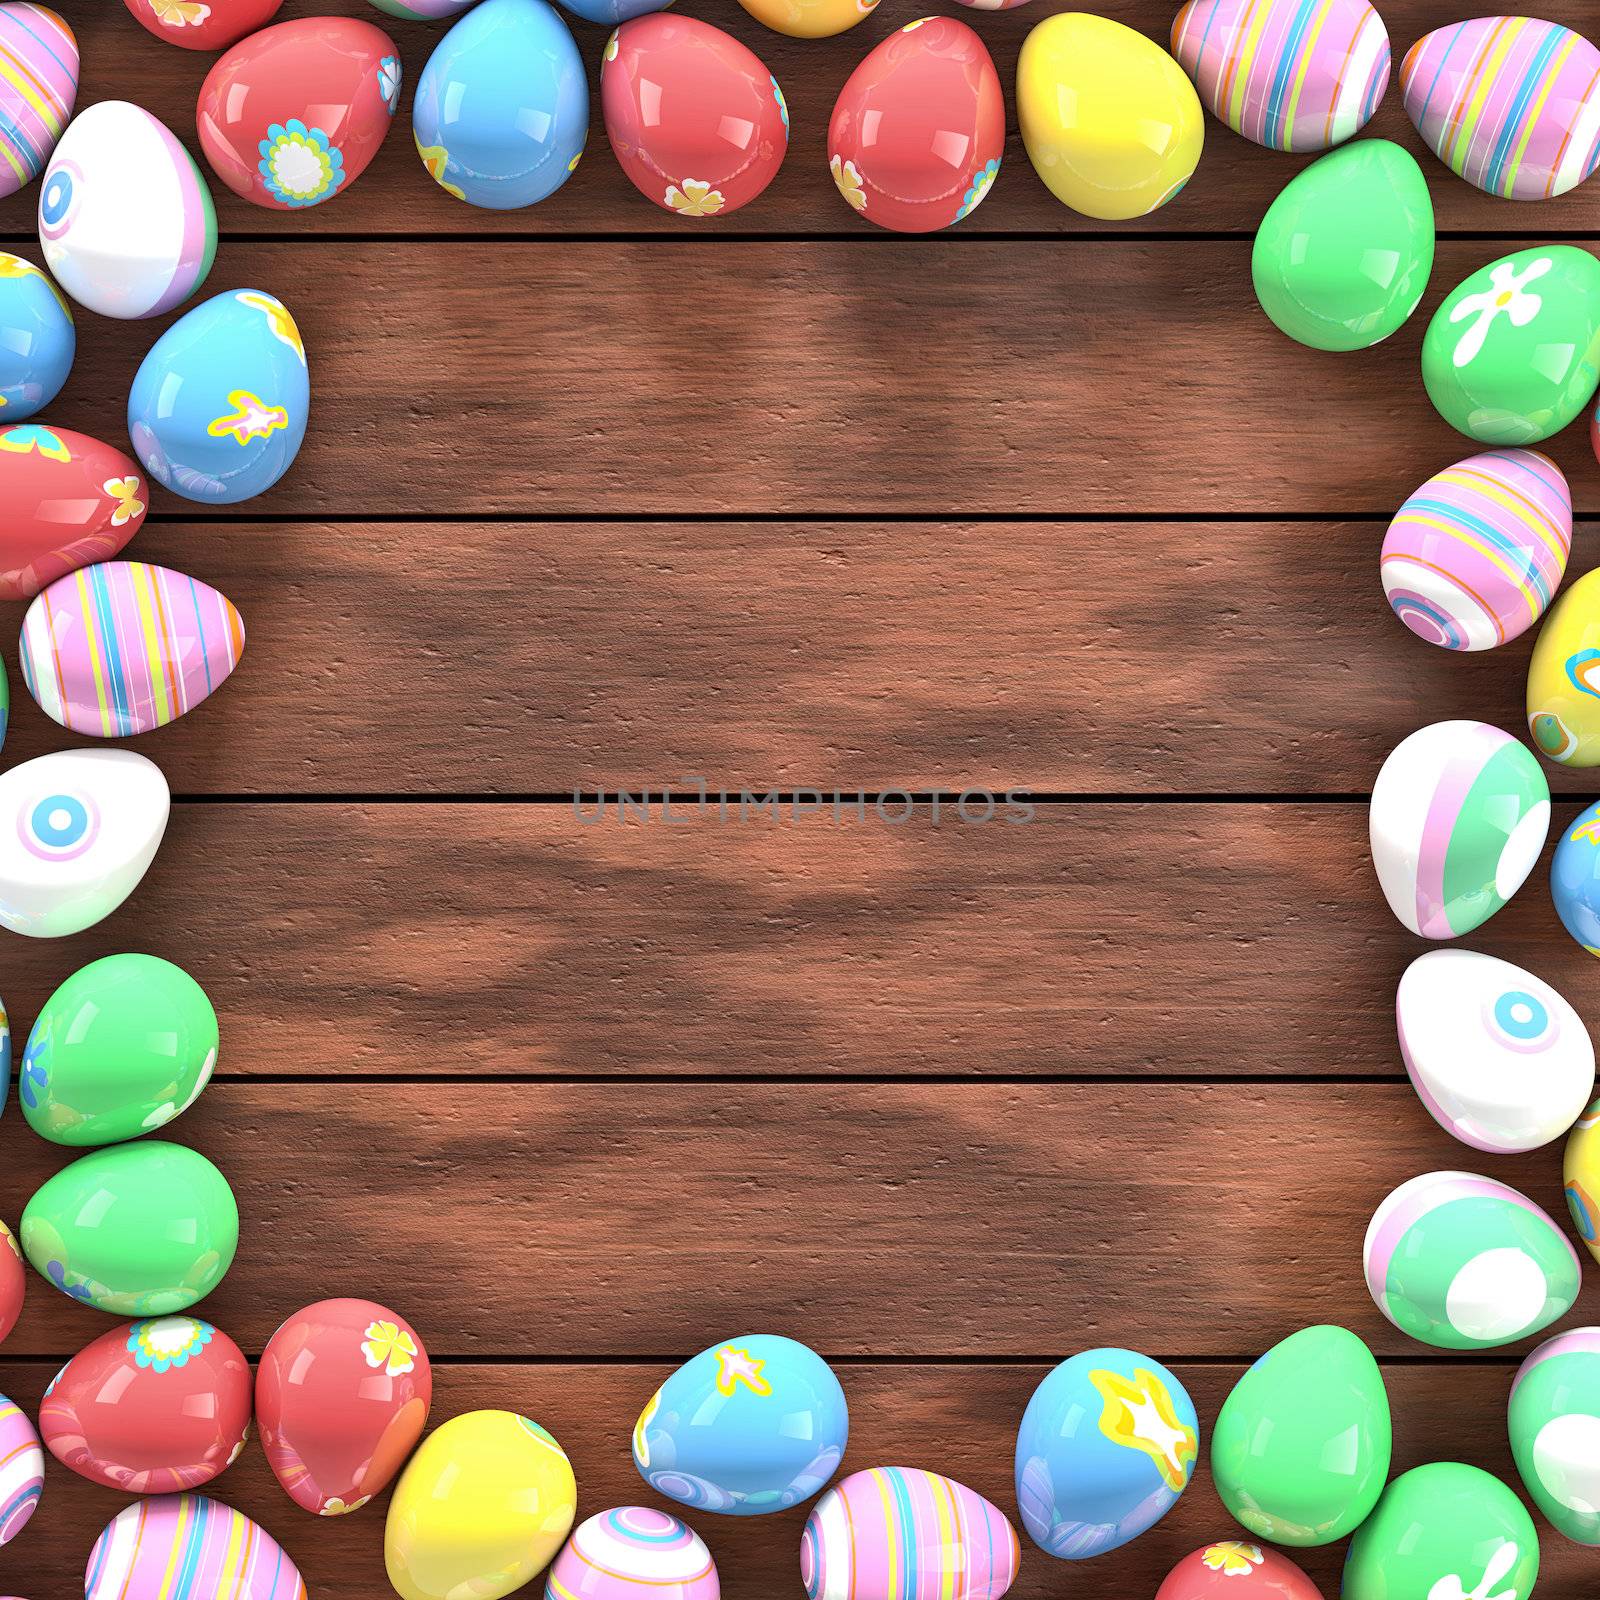 Colorful Easter eggs on a table forming a frame